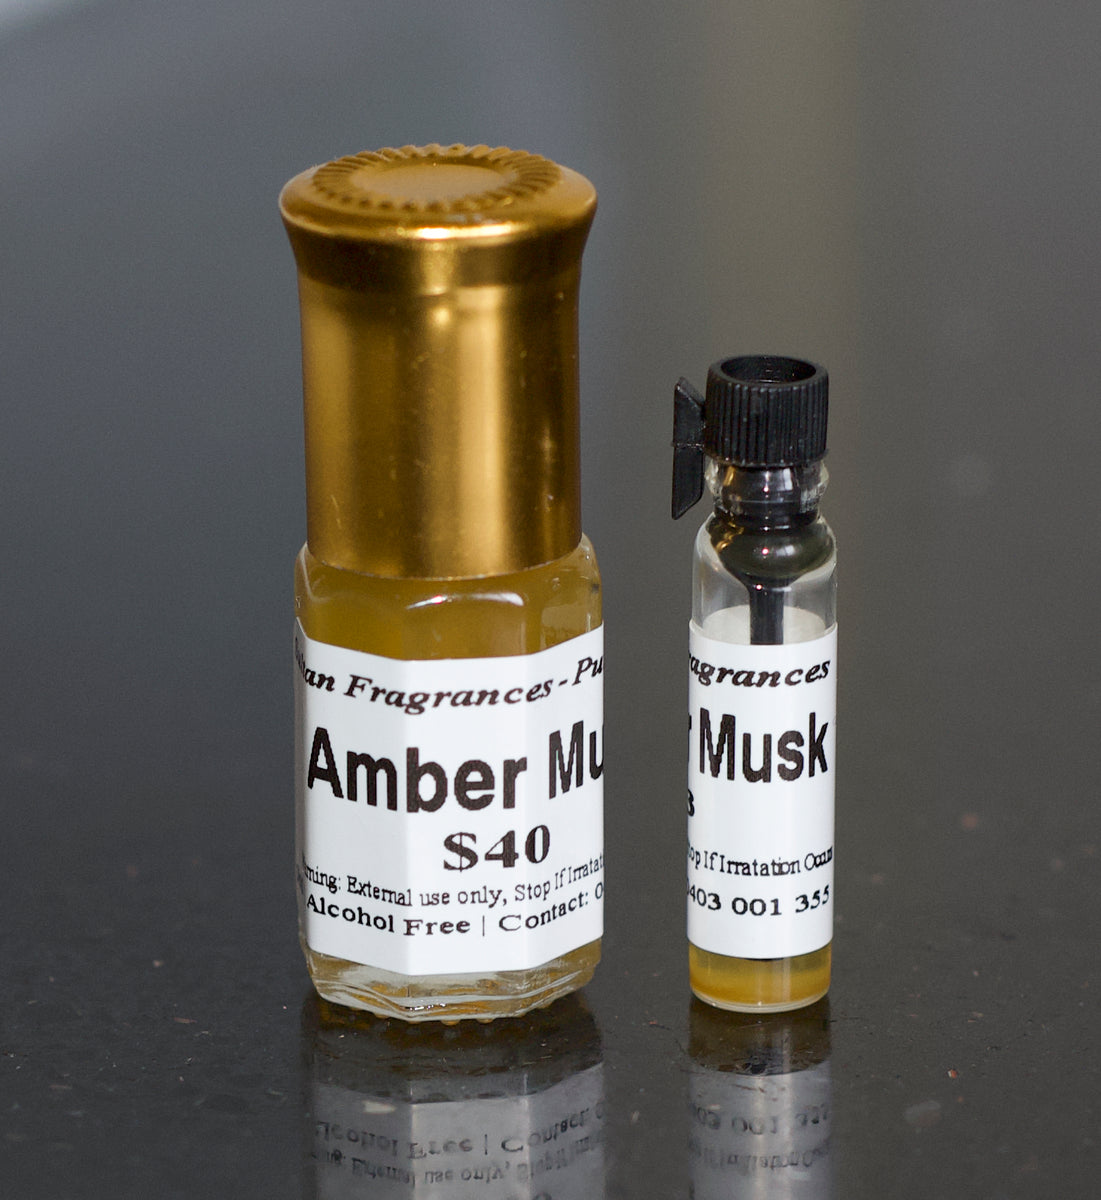 Sultan Fragrances Exclusive Blend - “Amber Musk”